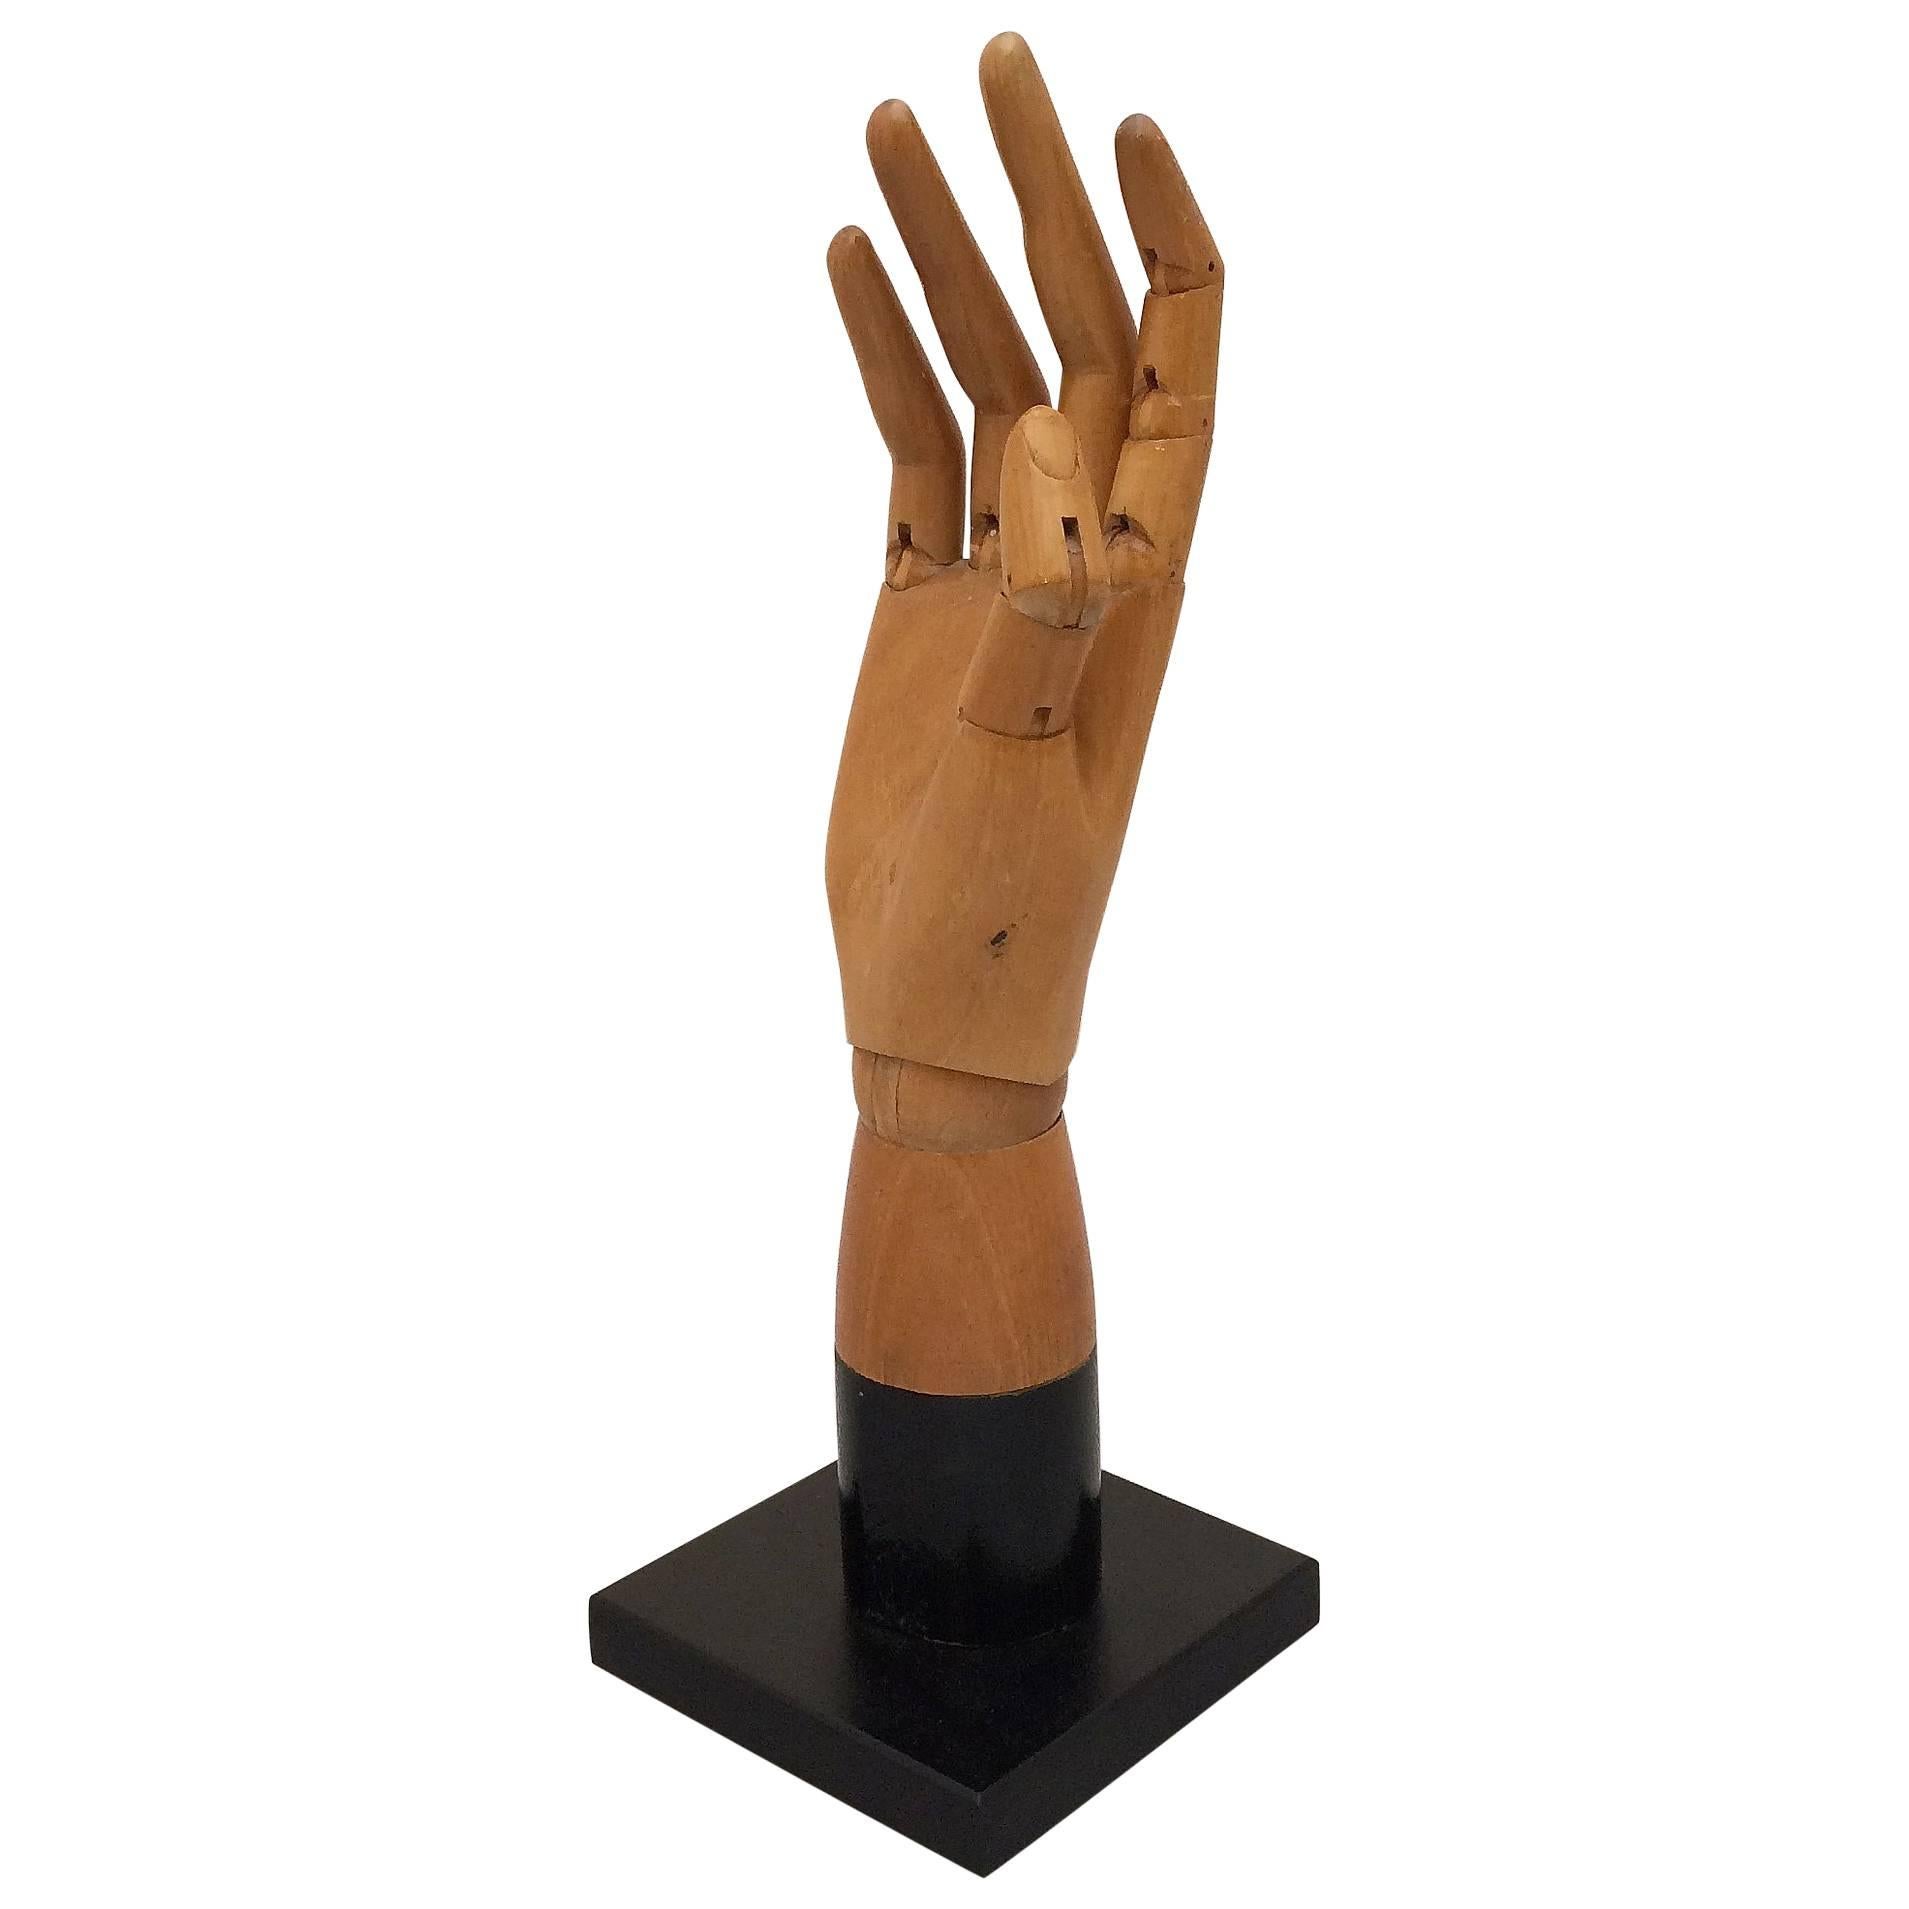 Articulated Model of Hand from England